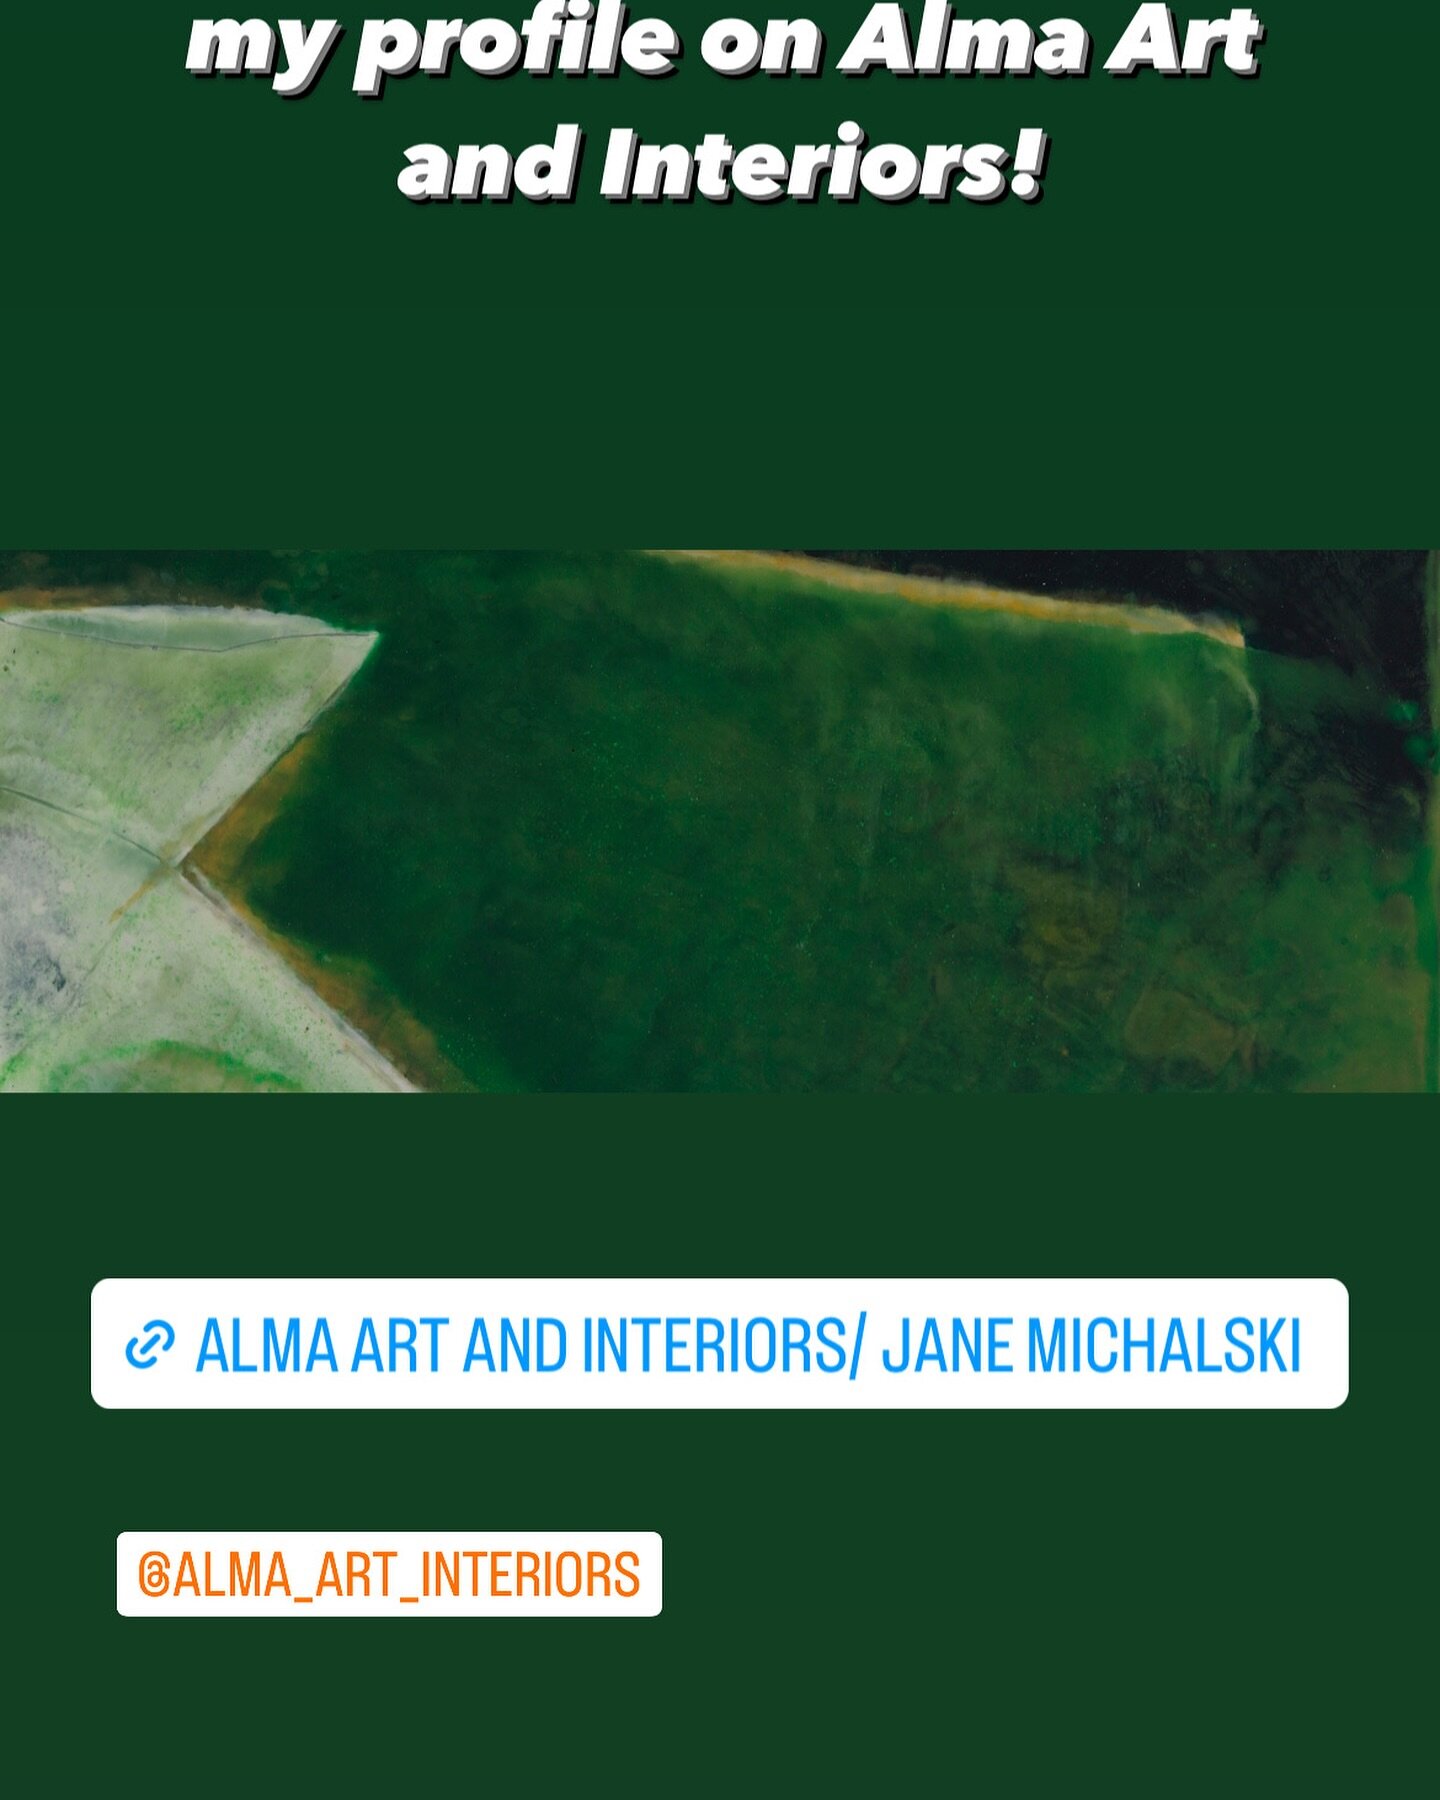 The opening for the next show at Alma Art and Interiors is Friday April 12! I&rsquo;m so happy to be included. In the meantime, you can check out my profile on their website or see my website link in bio for a look at other work. Sign up for my newsl